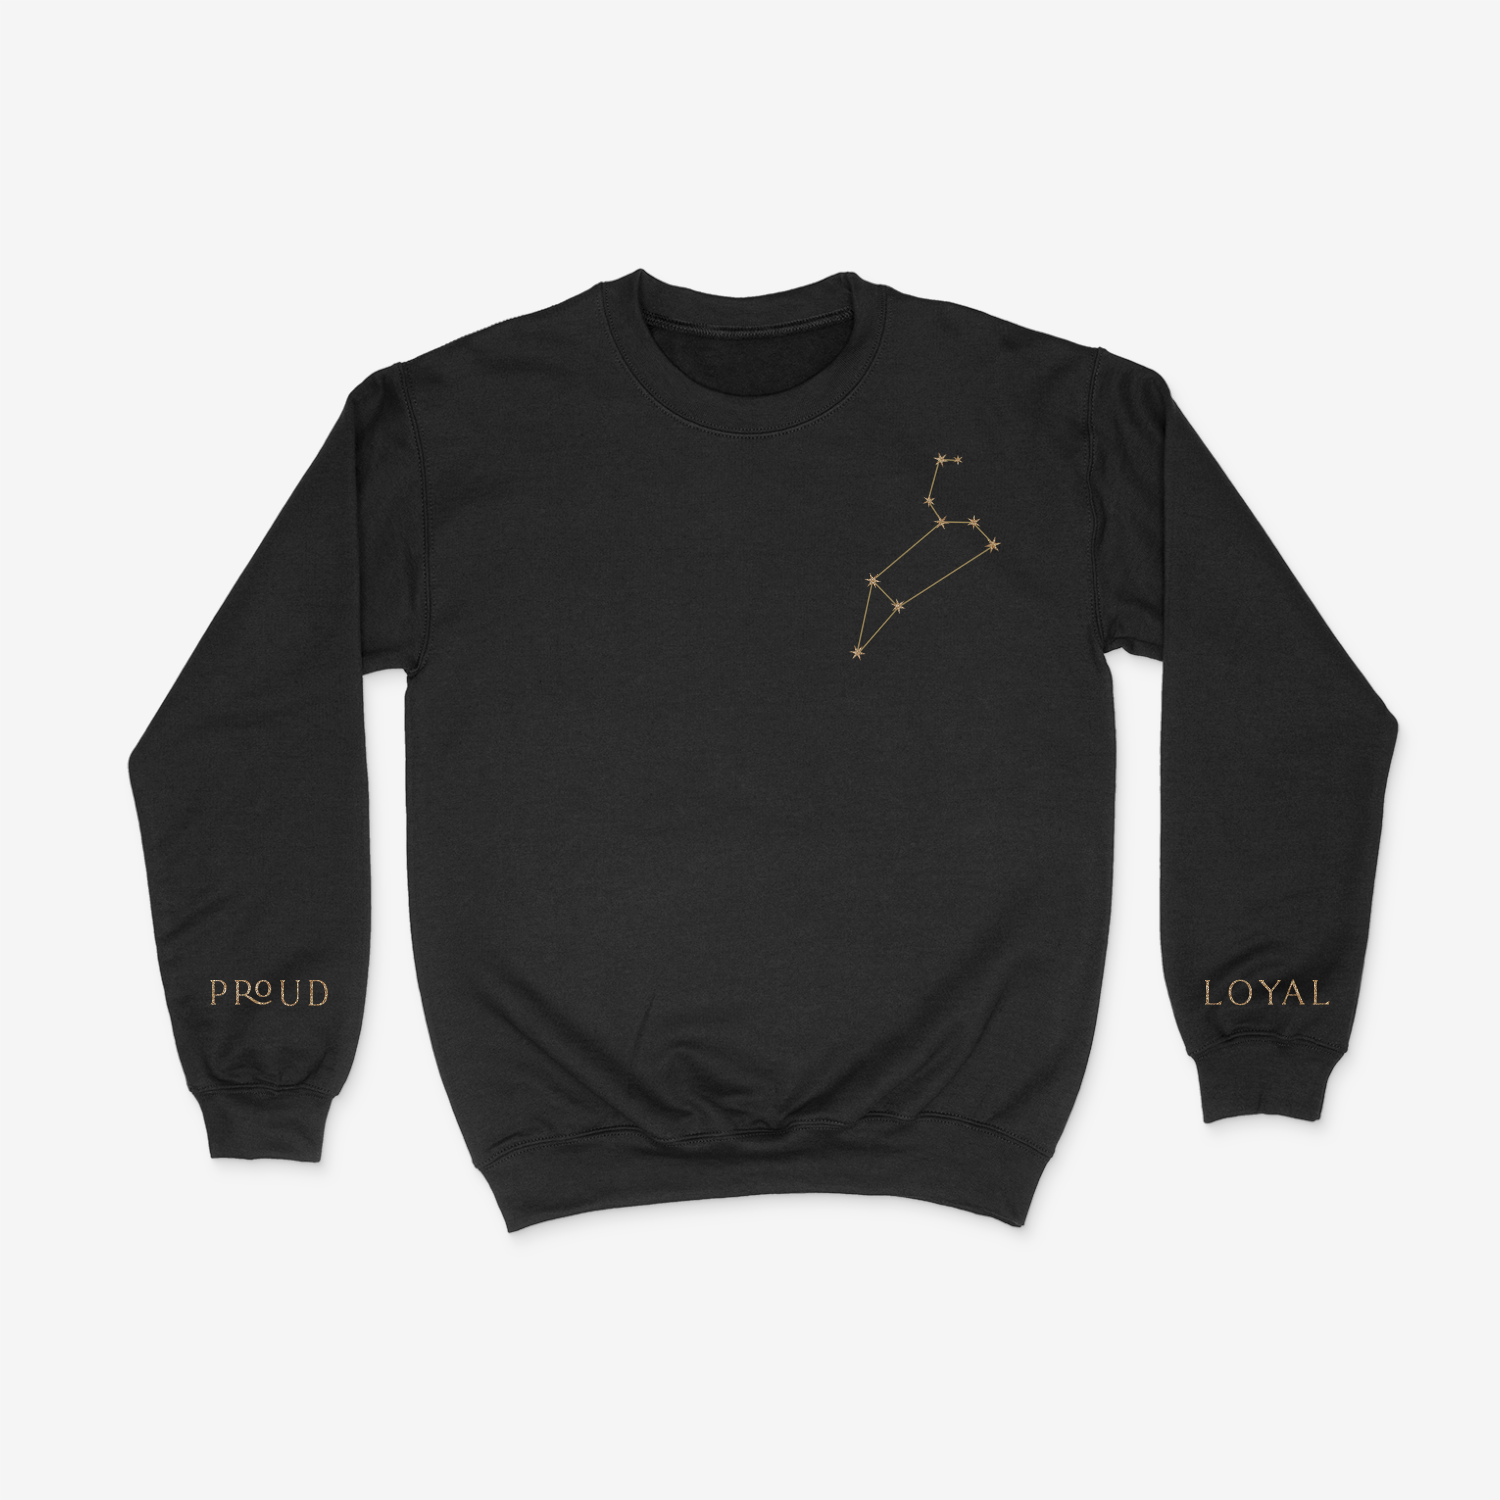 "What's Your Sign?" Constellation Collection